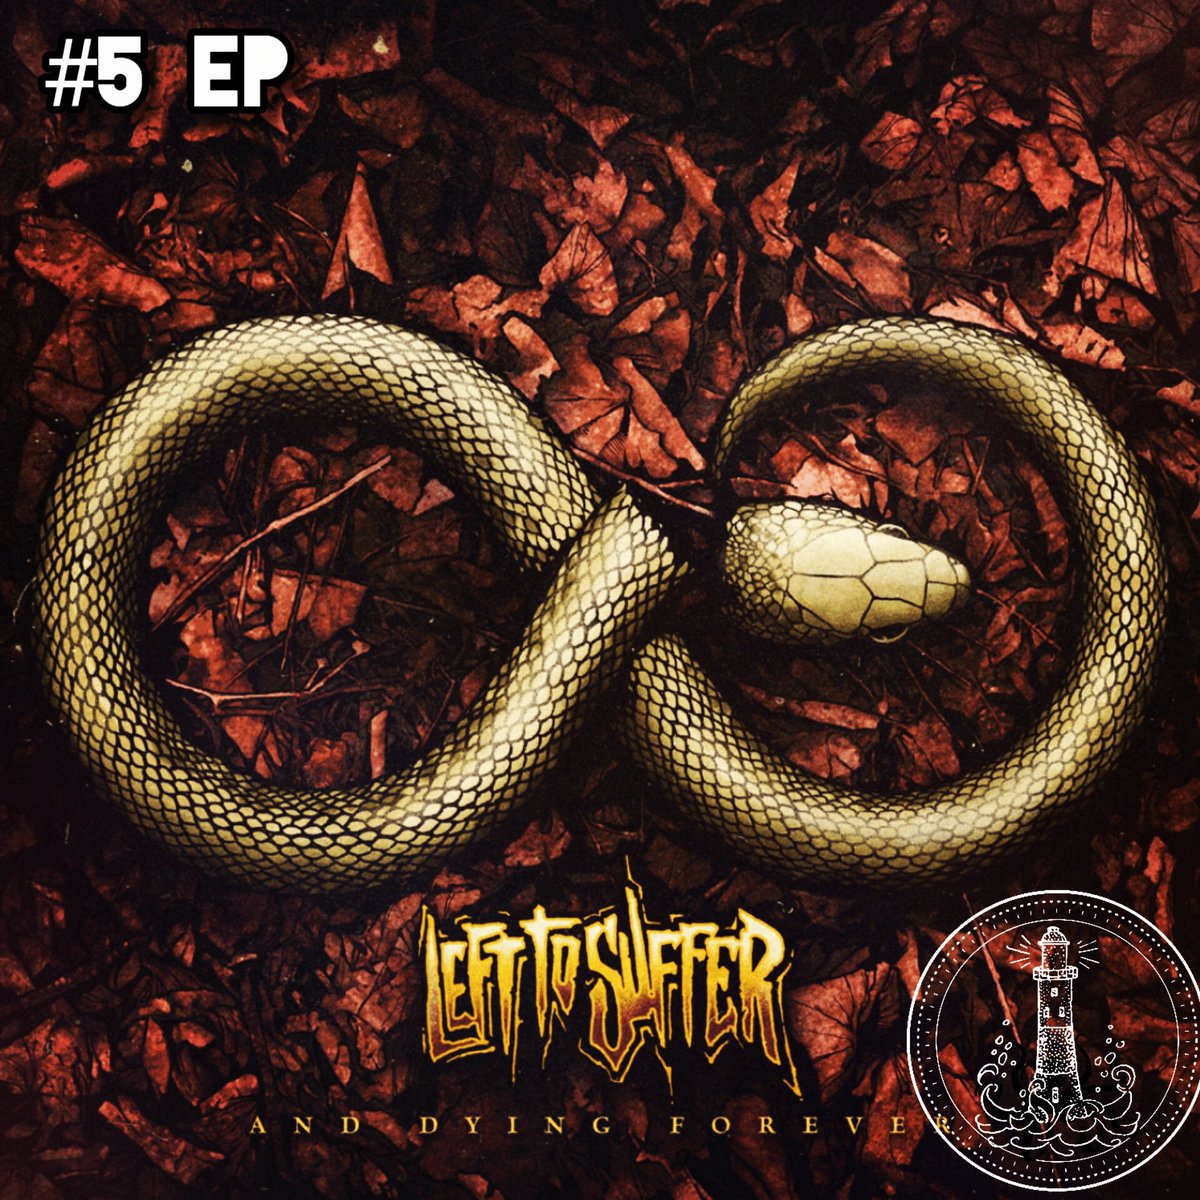 ⚓#5 in the Best EPs of 2022:
💿 Left To Suffer - 'And Dying Forever'
🎛️ Self-release

⚓ Full review available on the website, link in bio. 🎧
#aoty #aoty2022 #albumoftheyear #lefttosuffer #anddyingforever #taylorbarber